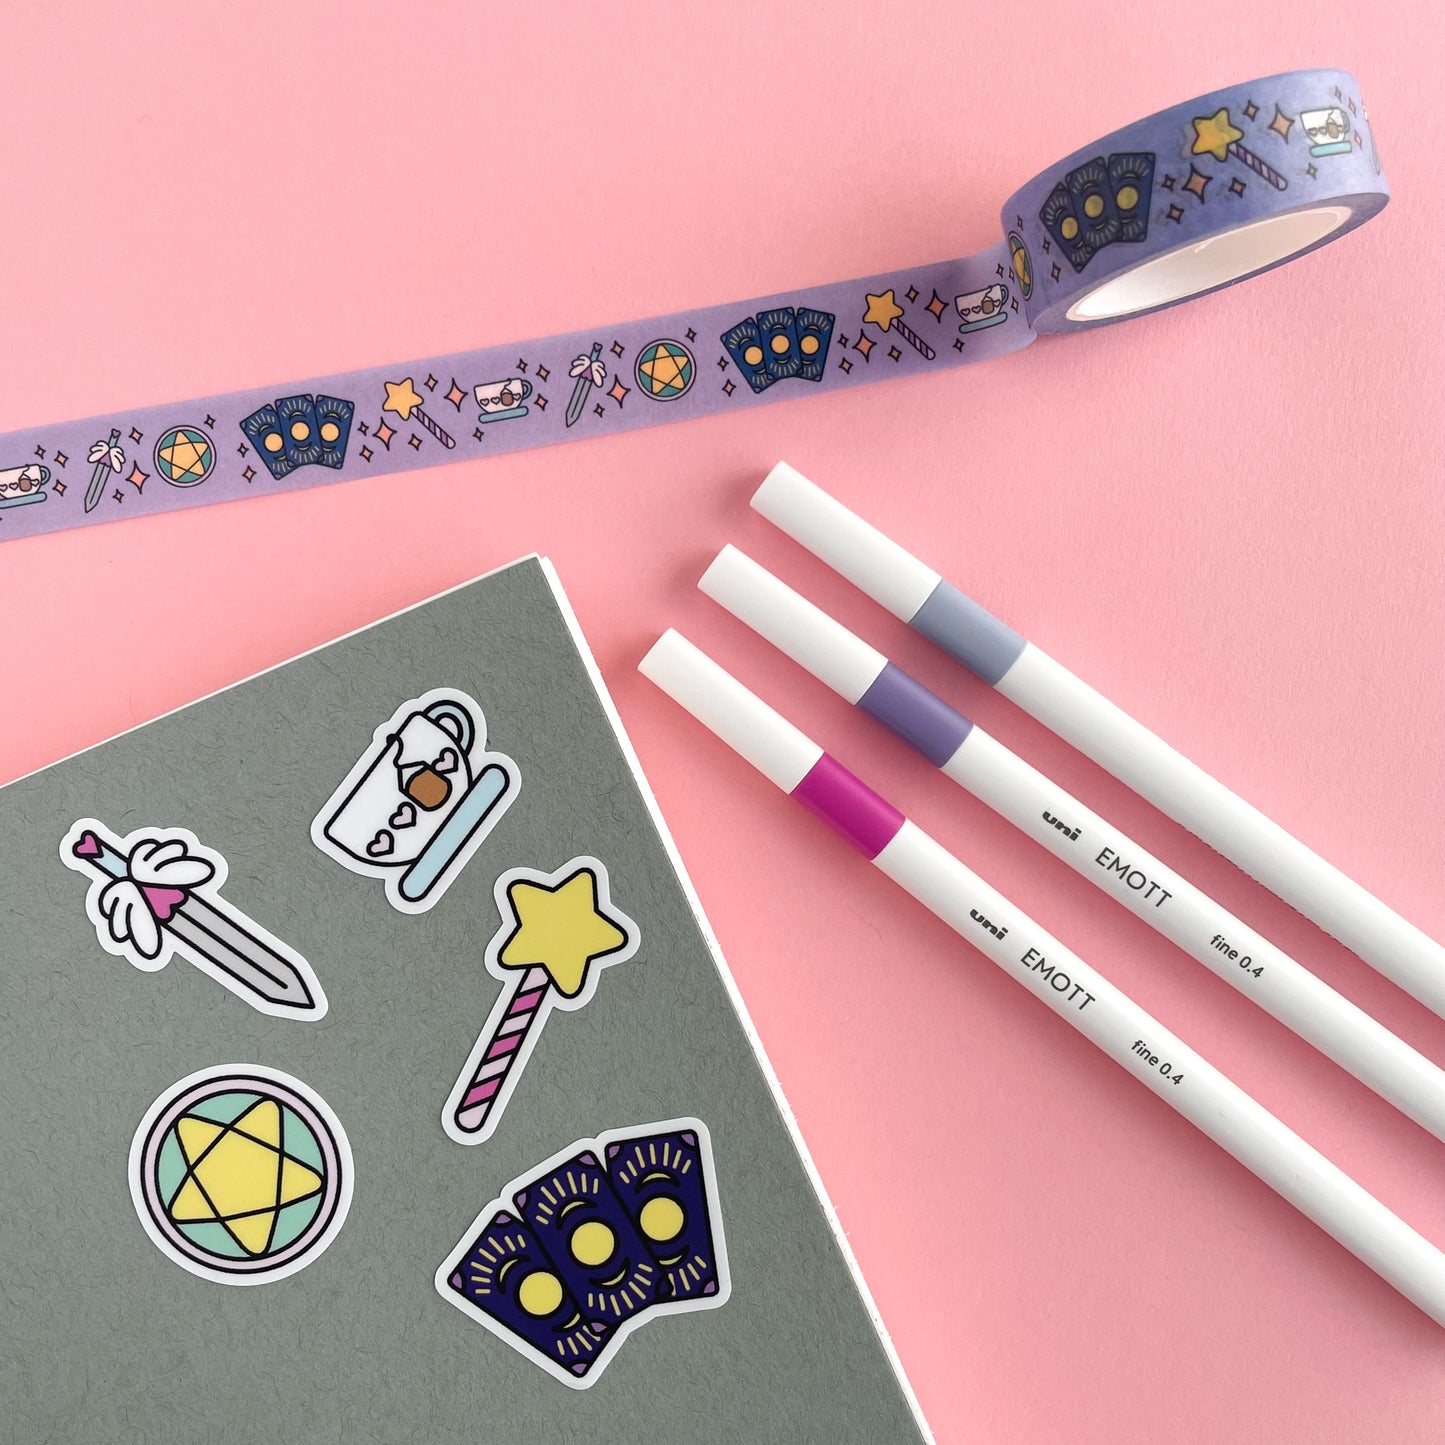 A grey notebook cover with stickers that are cute shapes of the different tarot suits, pentacles, swords, cups, wands, and fanned out cards. There are white pens and a roll of washi tape that matches the stickers around the notebook. This is all on a pink background.